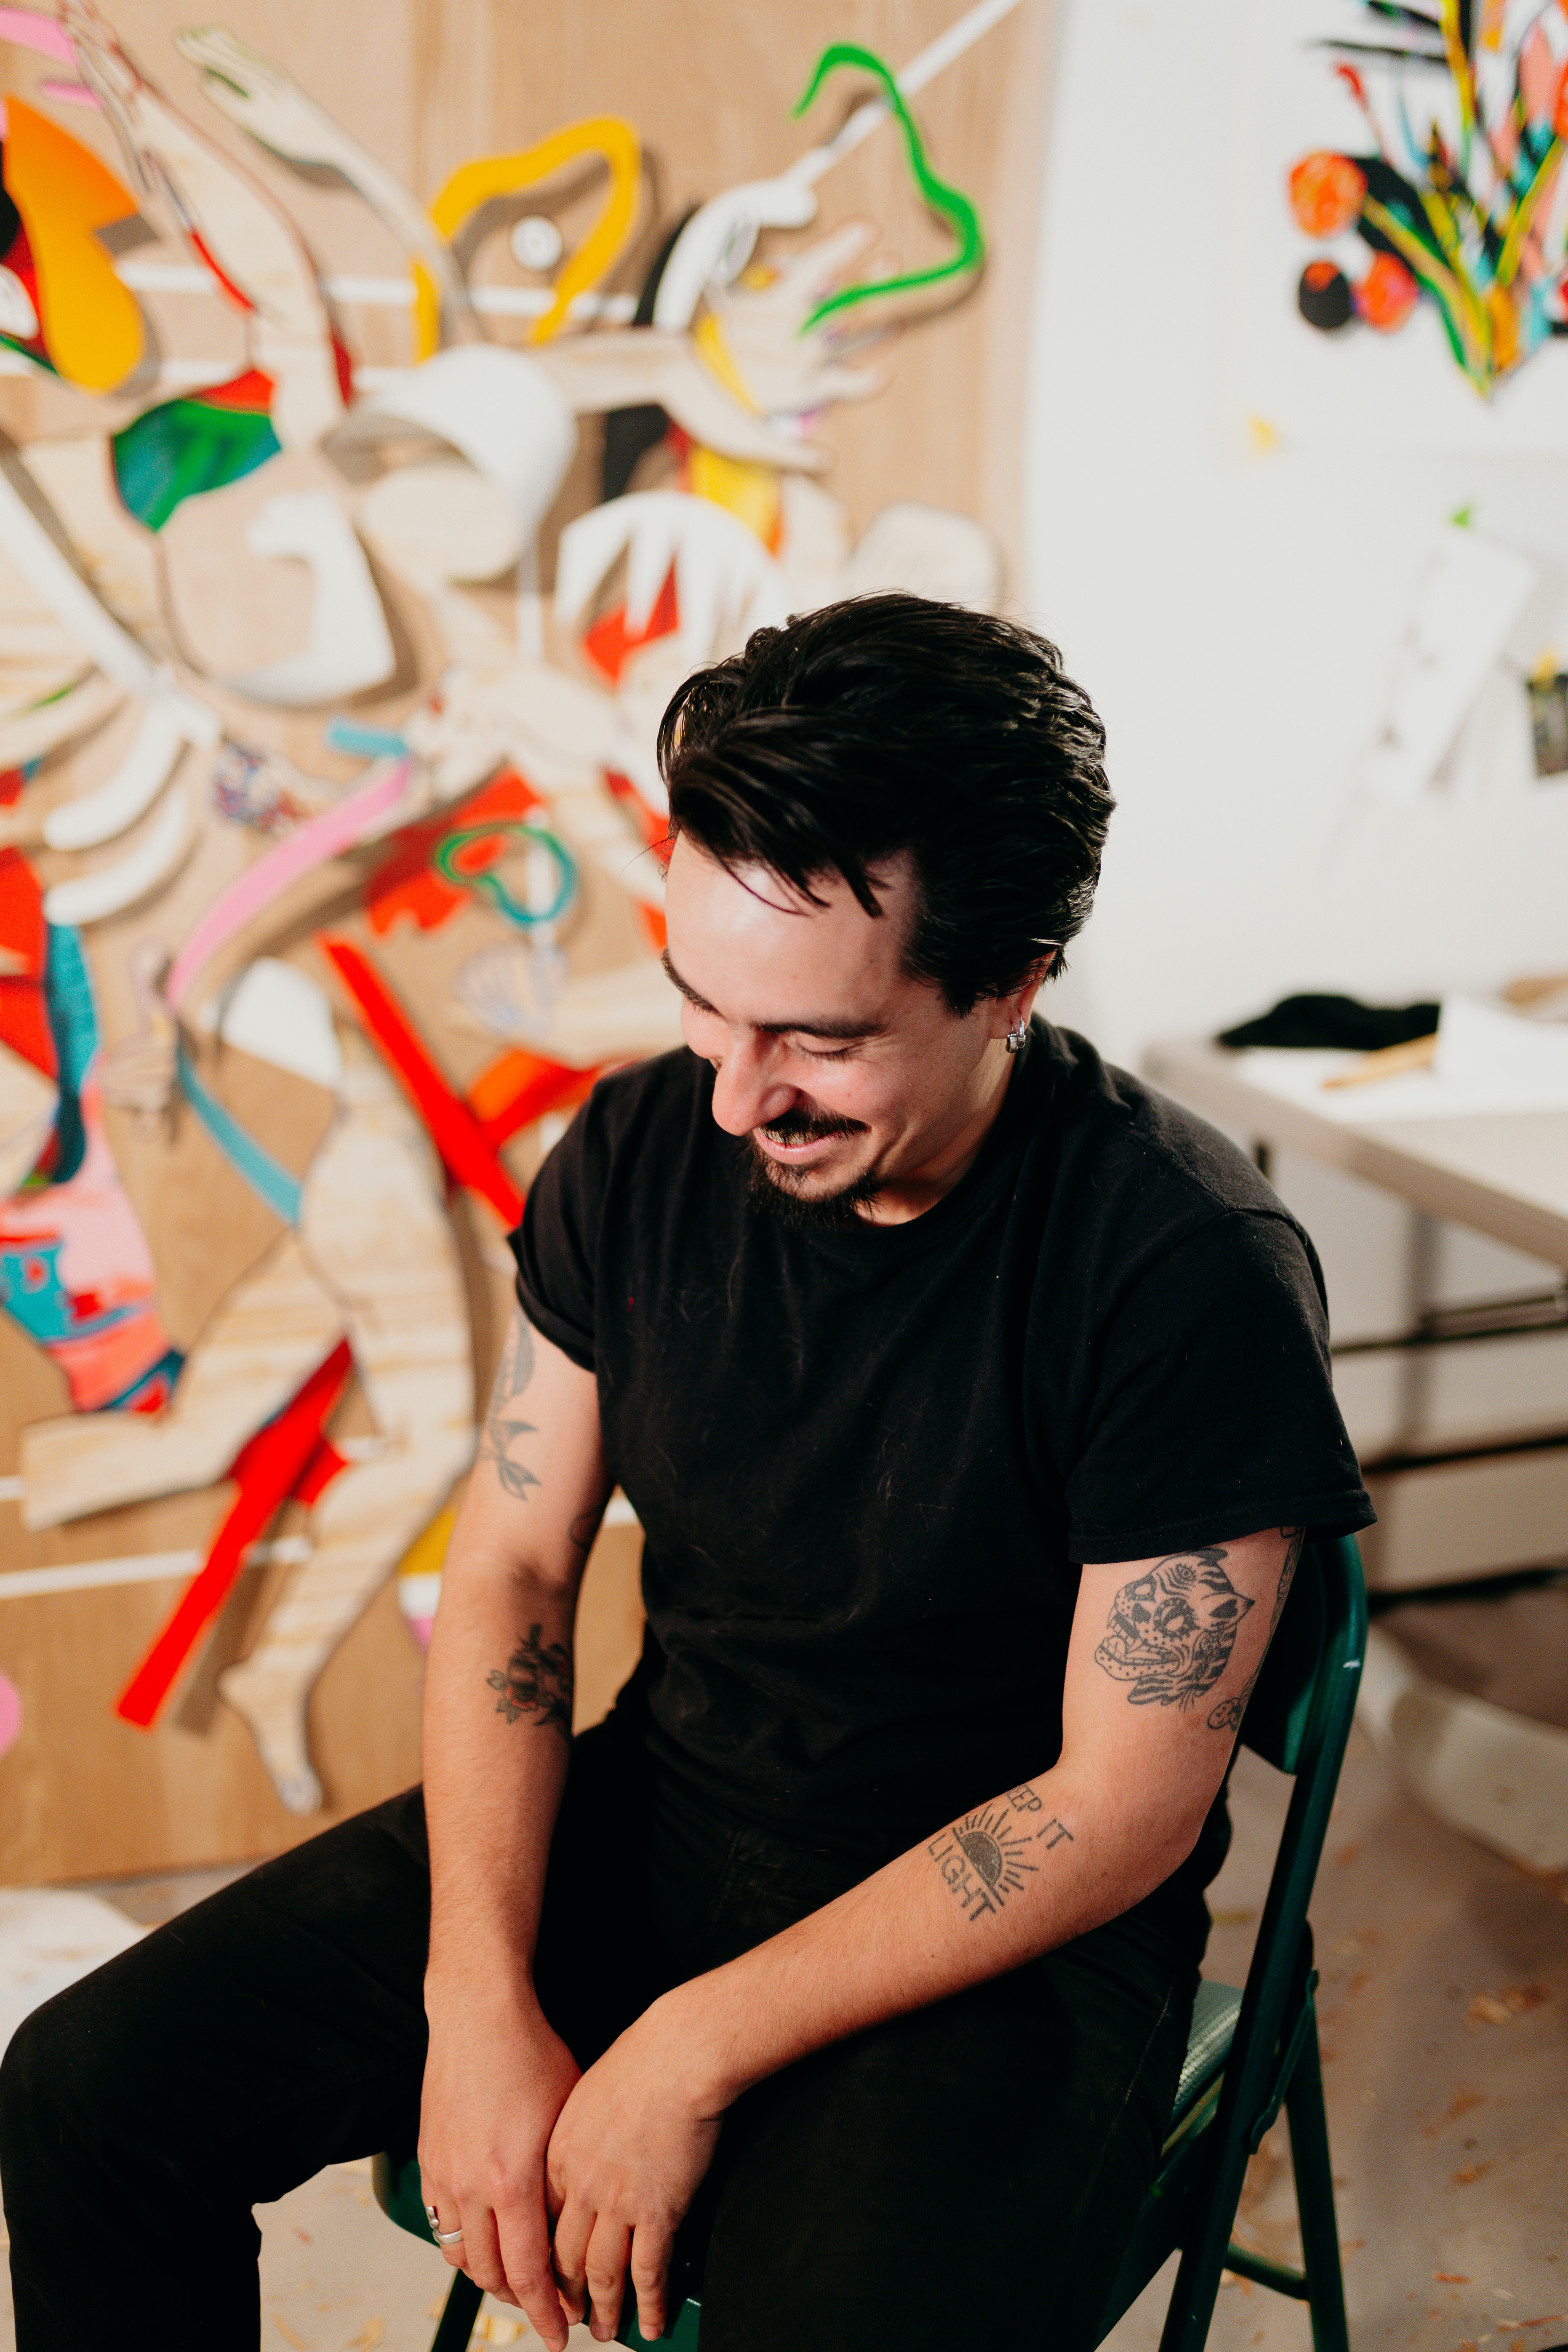 Portrait of a man sitting on a chair in a studio space. He is wearing a black t shirt and black pants. He is mid laugh